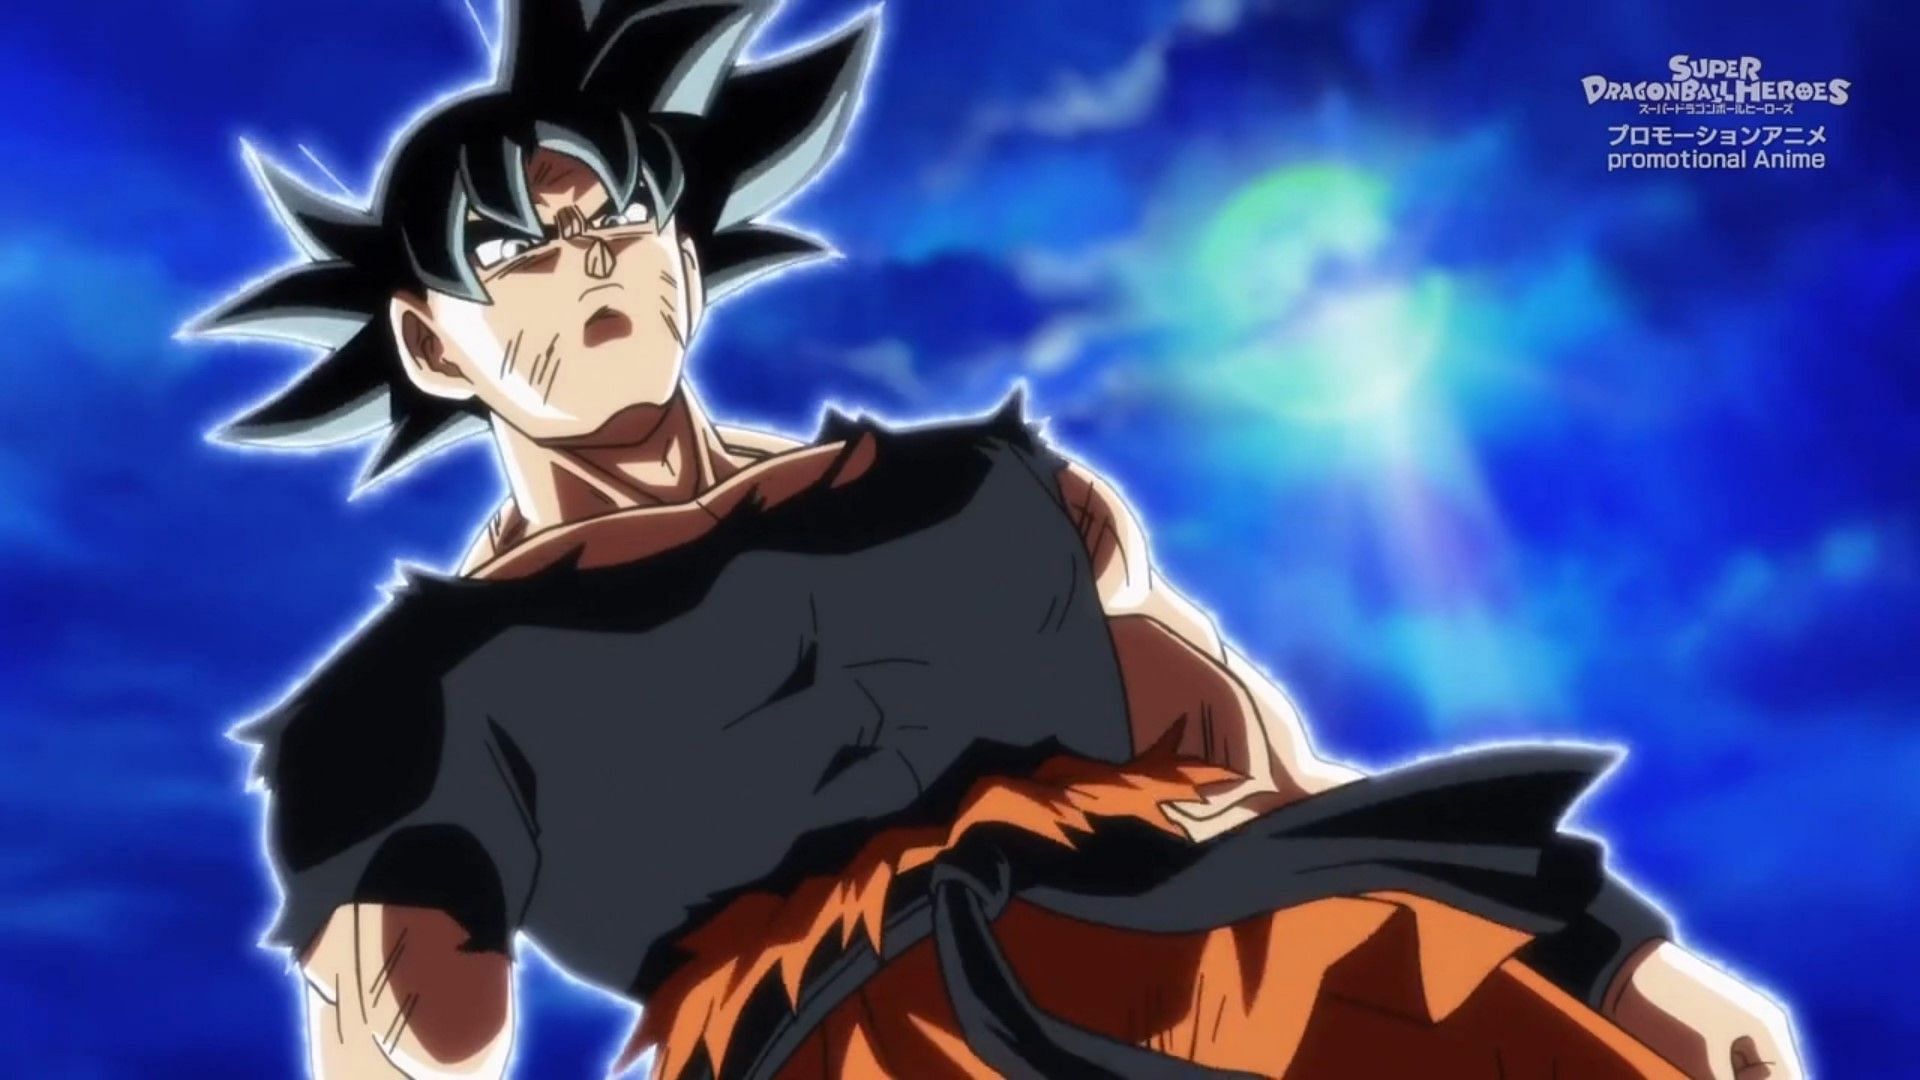 How to Watch 'Dragon Ball Heroes' in US 2023 Online Free: Where to